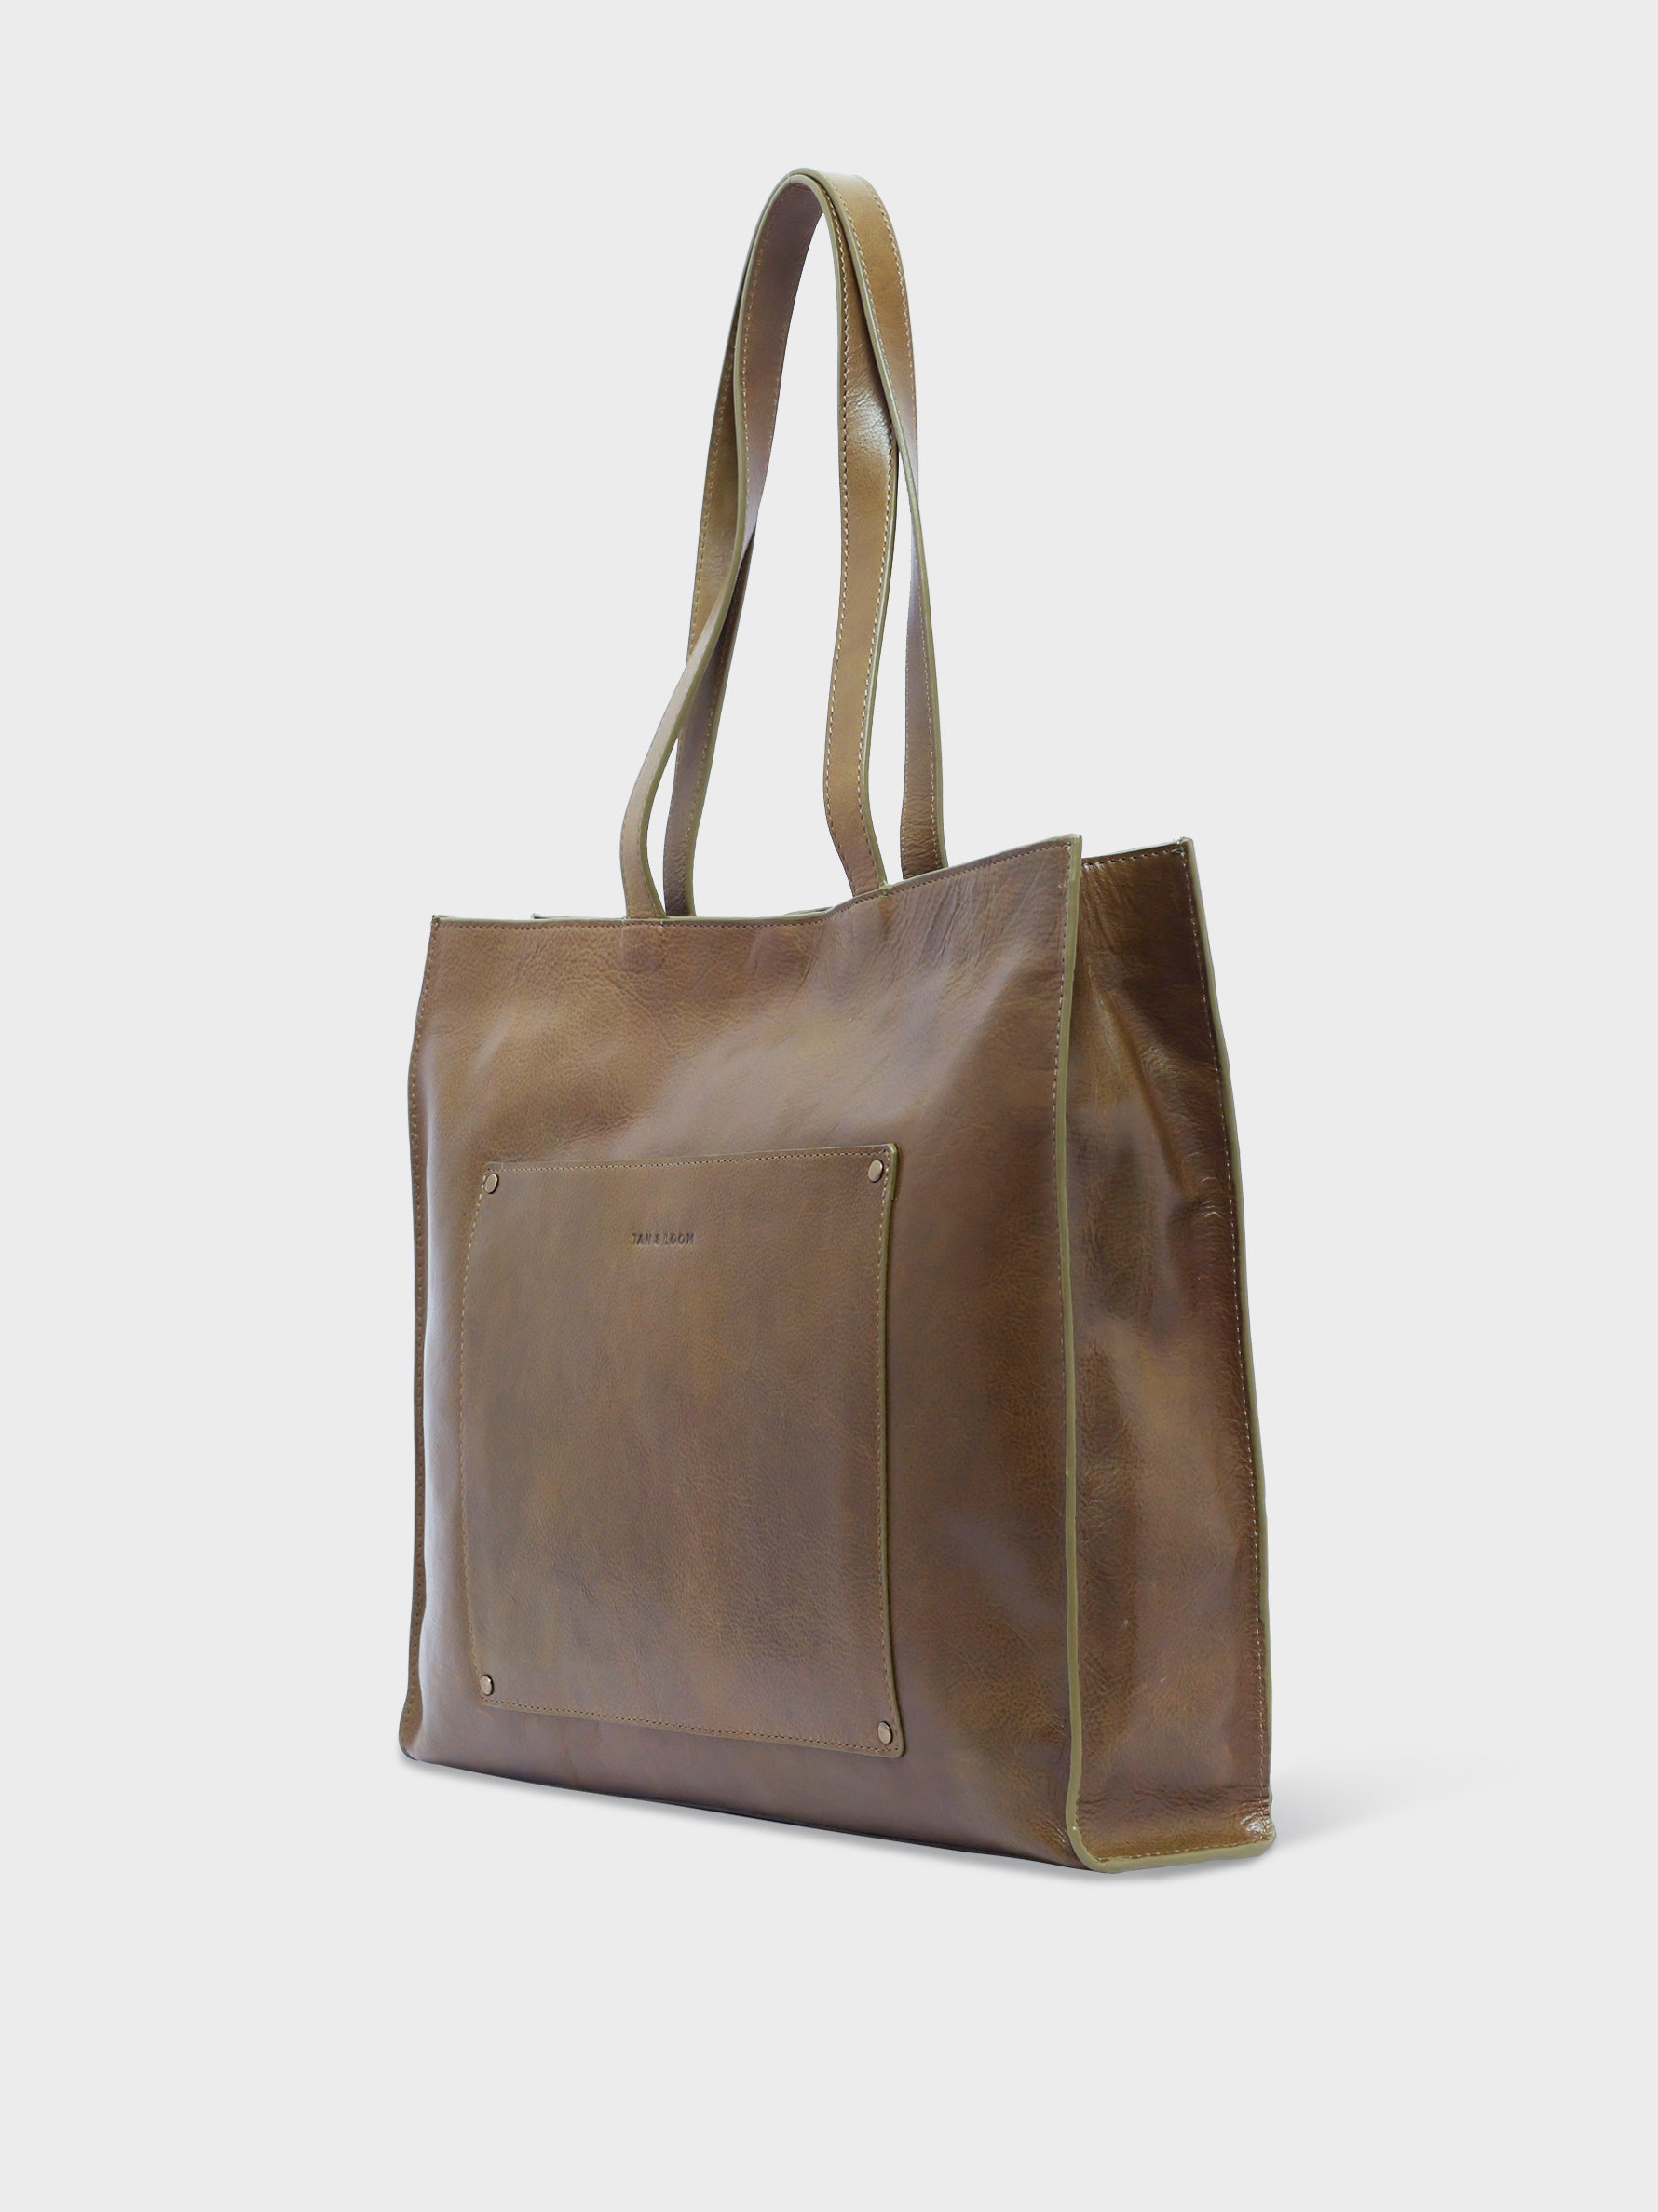 Handcrafted Genuine Vegetable Tanned Leather Artist's Tote Olive Green for Women Tan & Loom